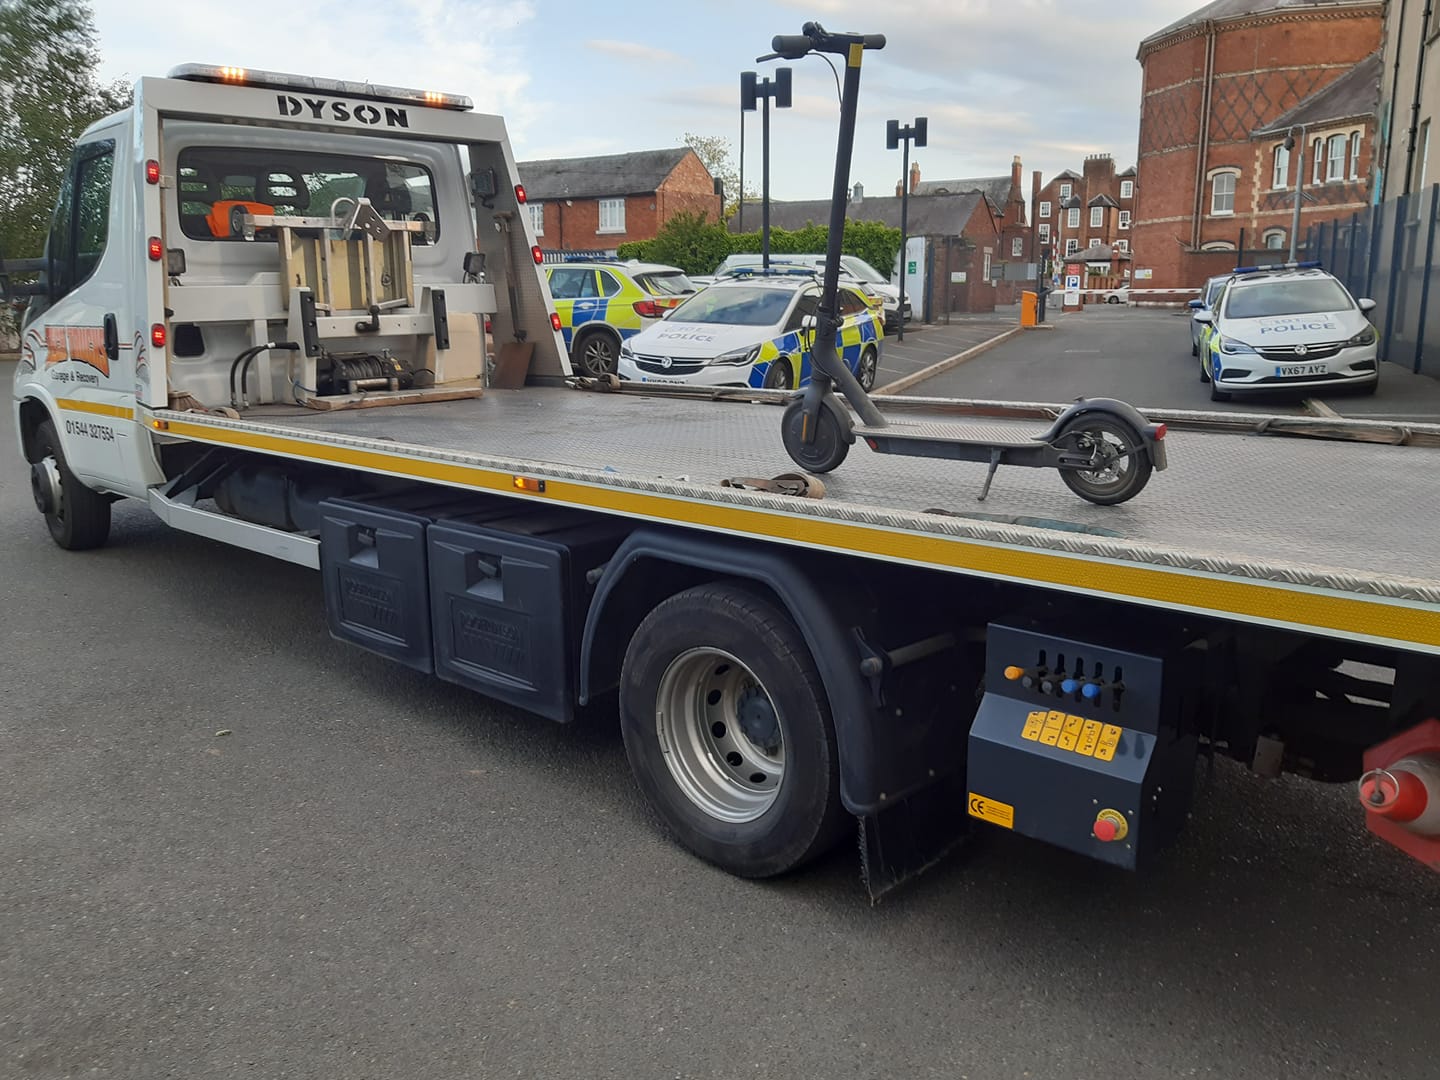 NEWS | West Mercia Police are cracking down on illegal use of E-Scooters in Herefordshire